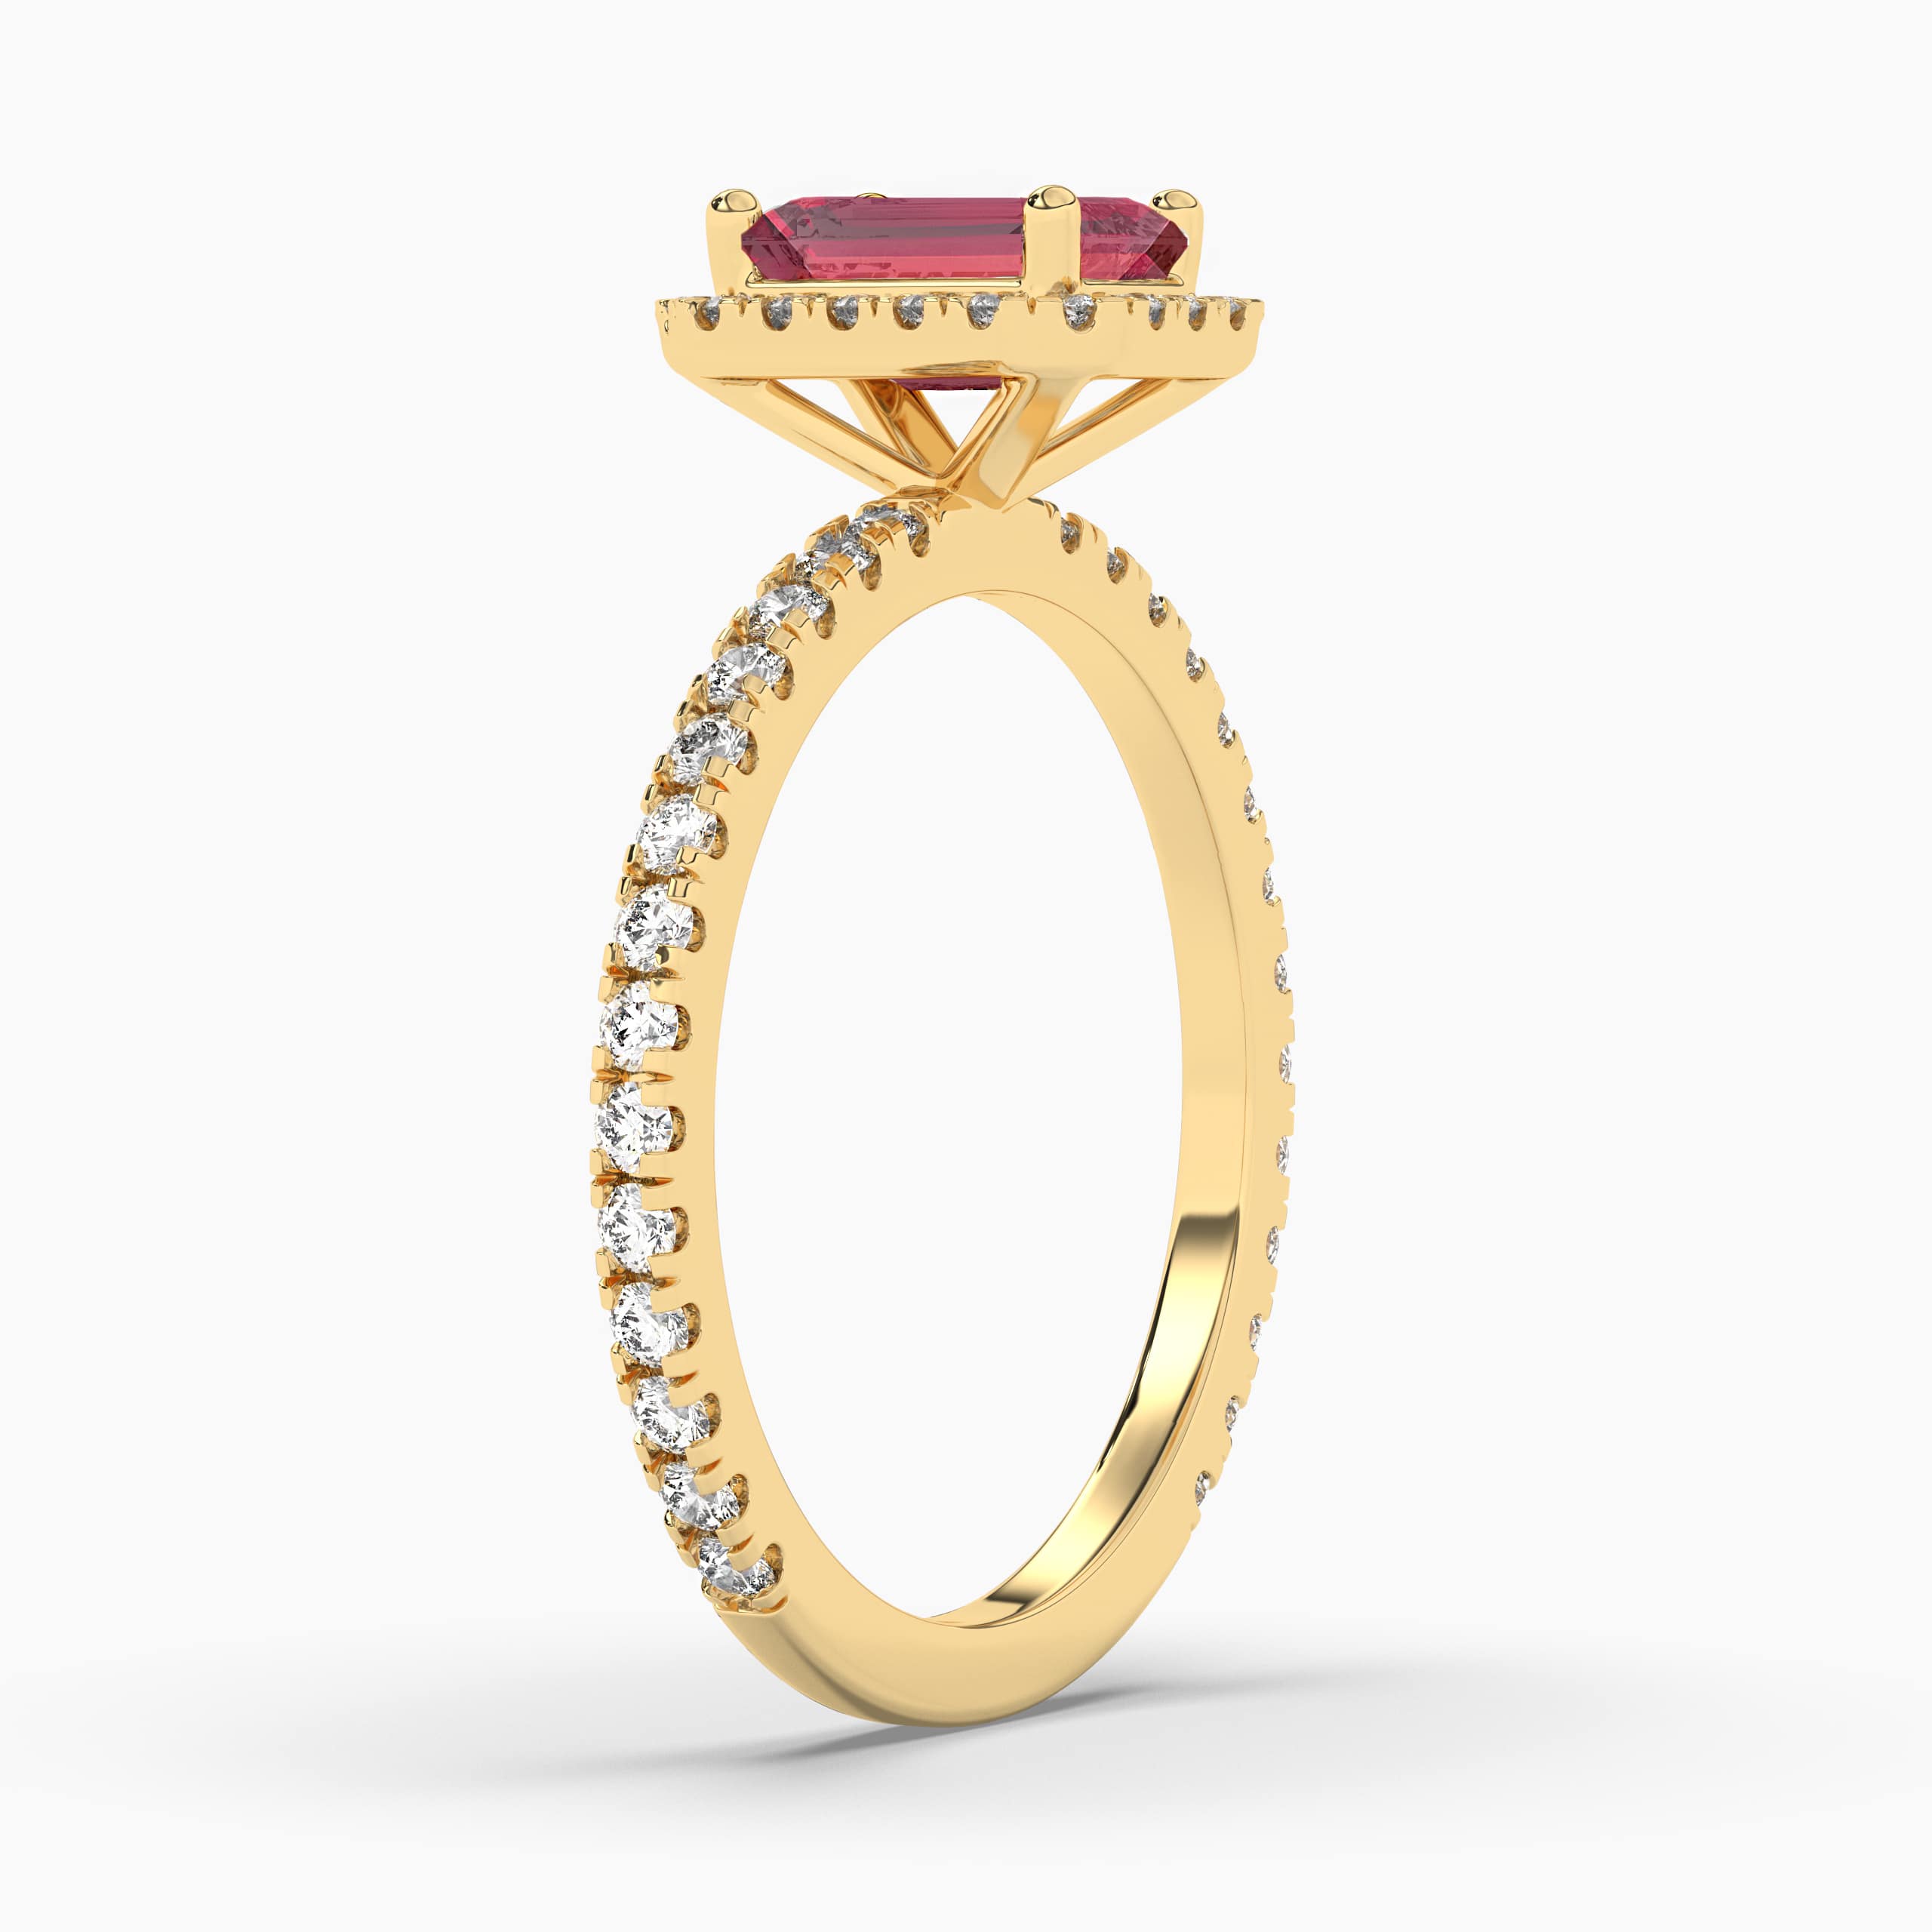 YELLOW GOLD EMERALD CUT RUBY AND DIAMOND HALO ENGAGEMENT RING